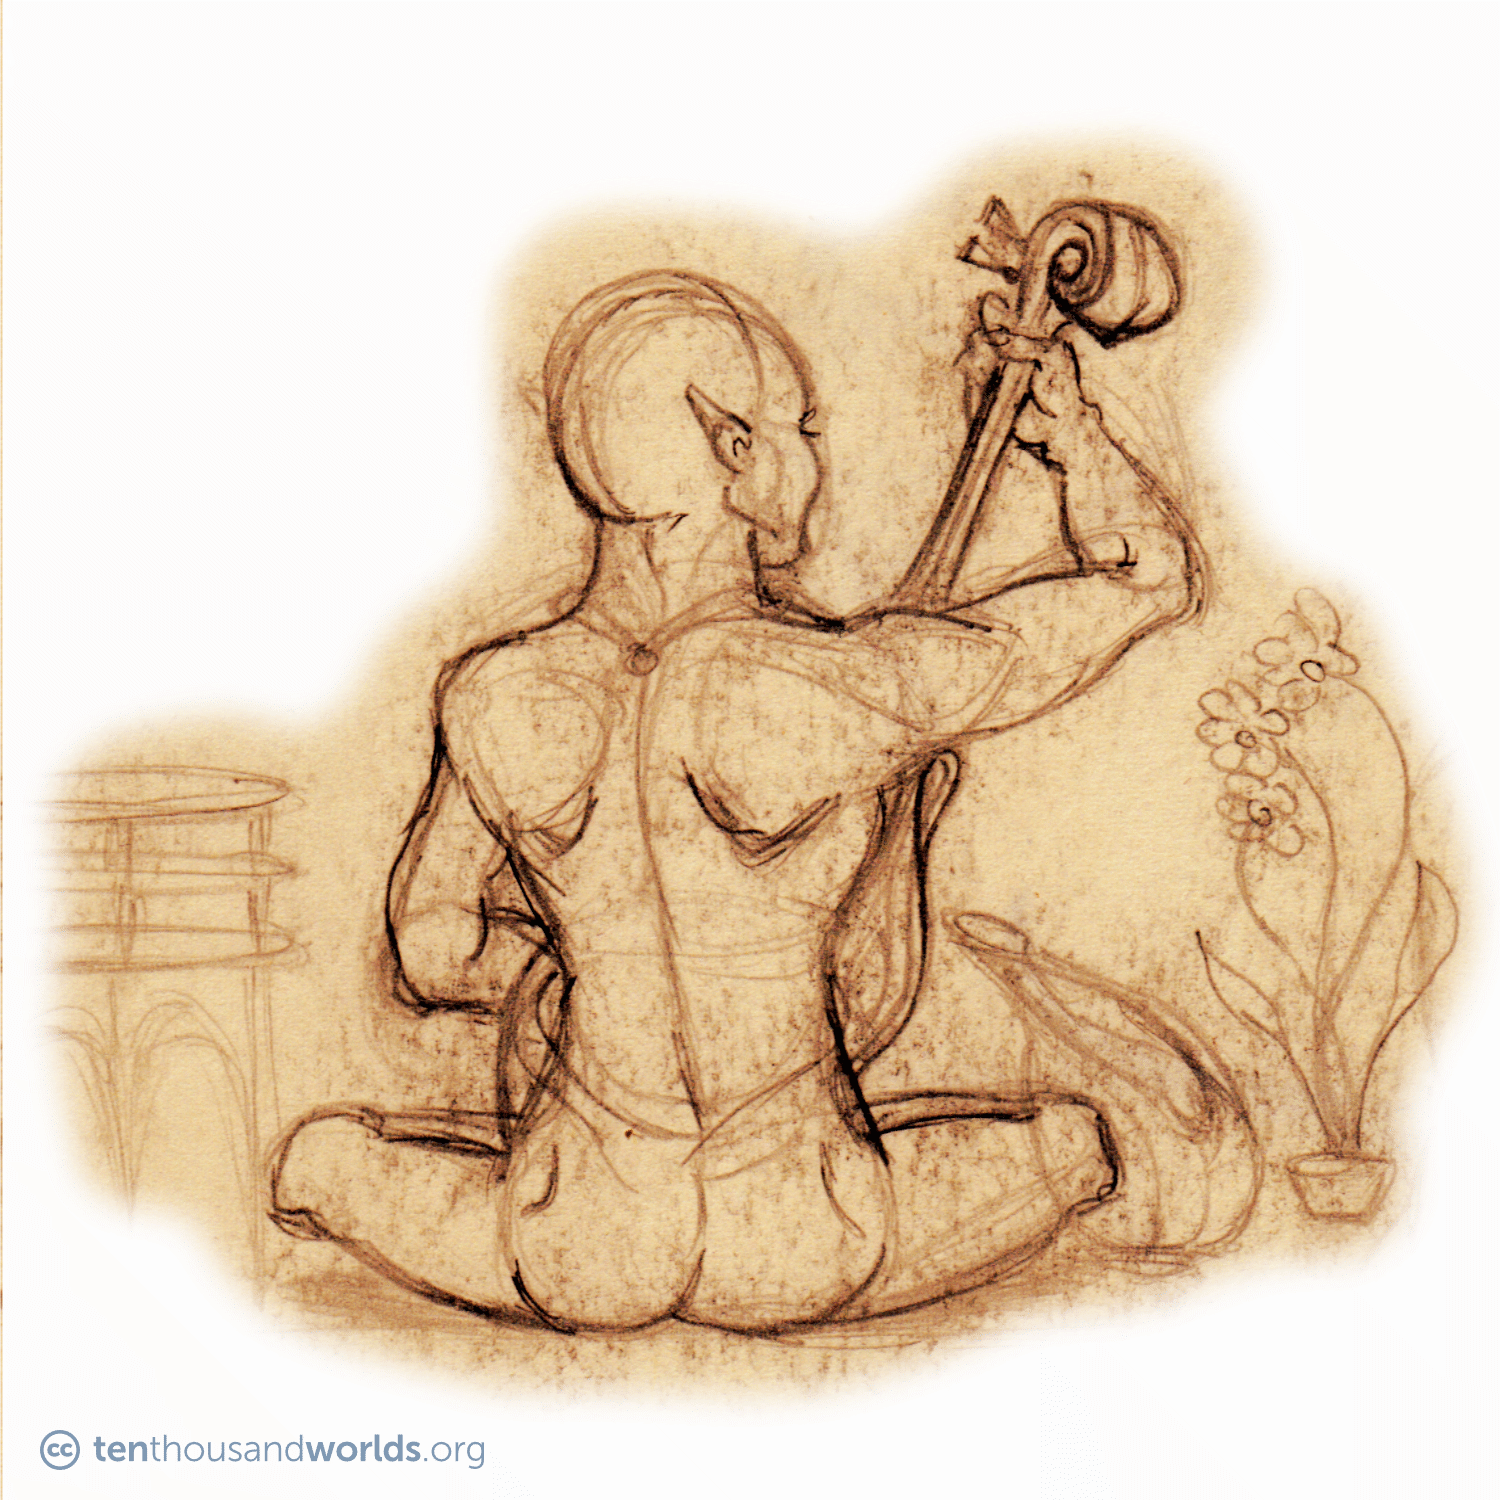 A pencil sketch. Approached from behind: a human-like being with pointed ears and a hairless head, sitting cross-legged in loose robes, playing a lute-like instrument.